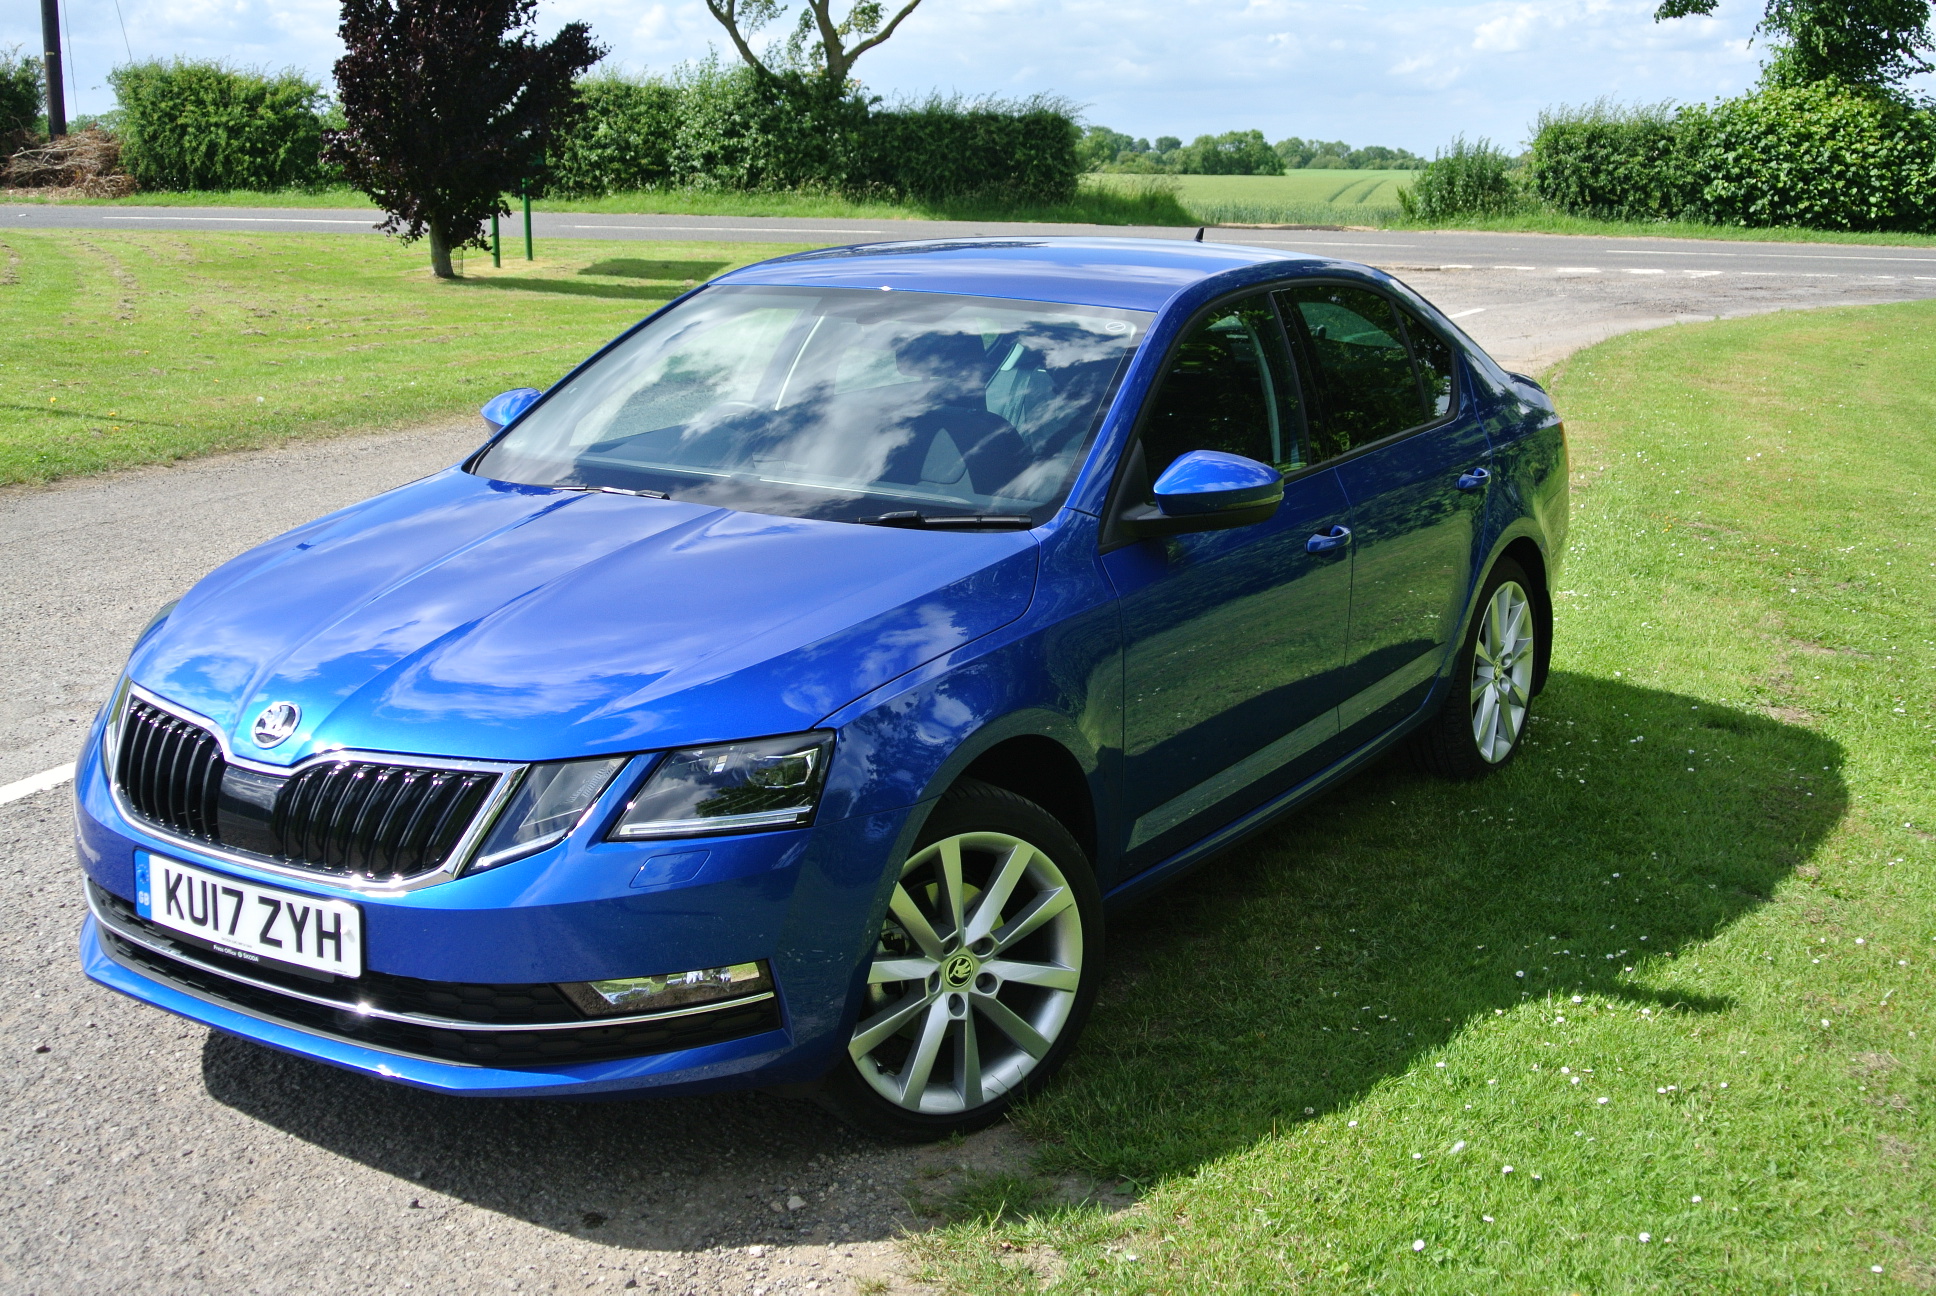 Much-admired Skoda has lost its value proposition with latest Octavia